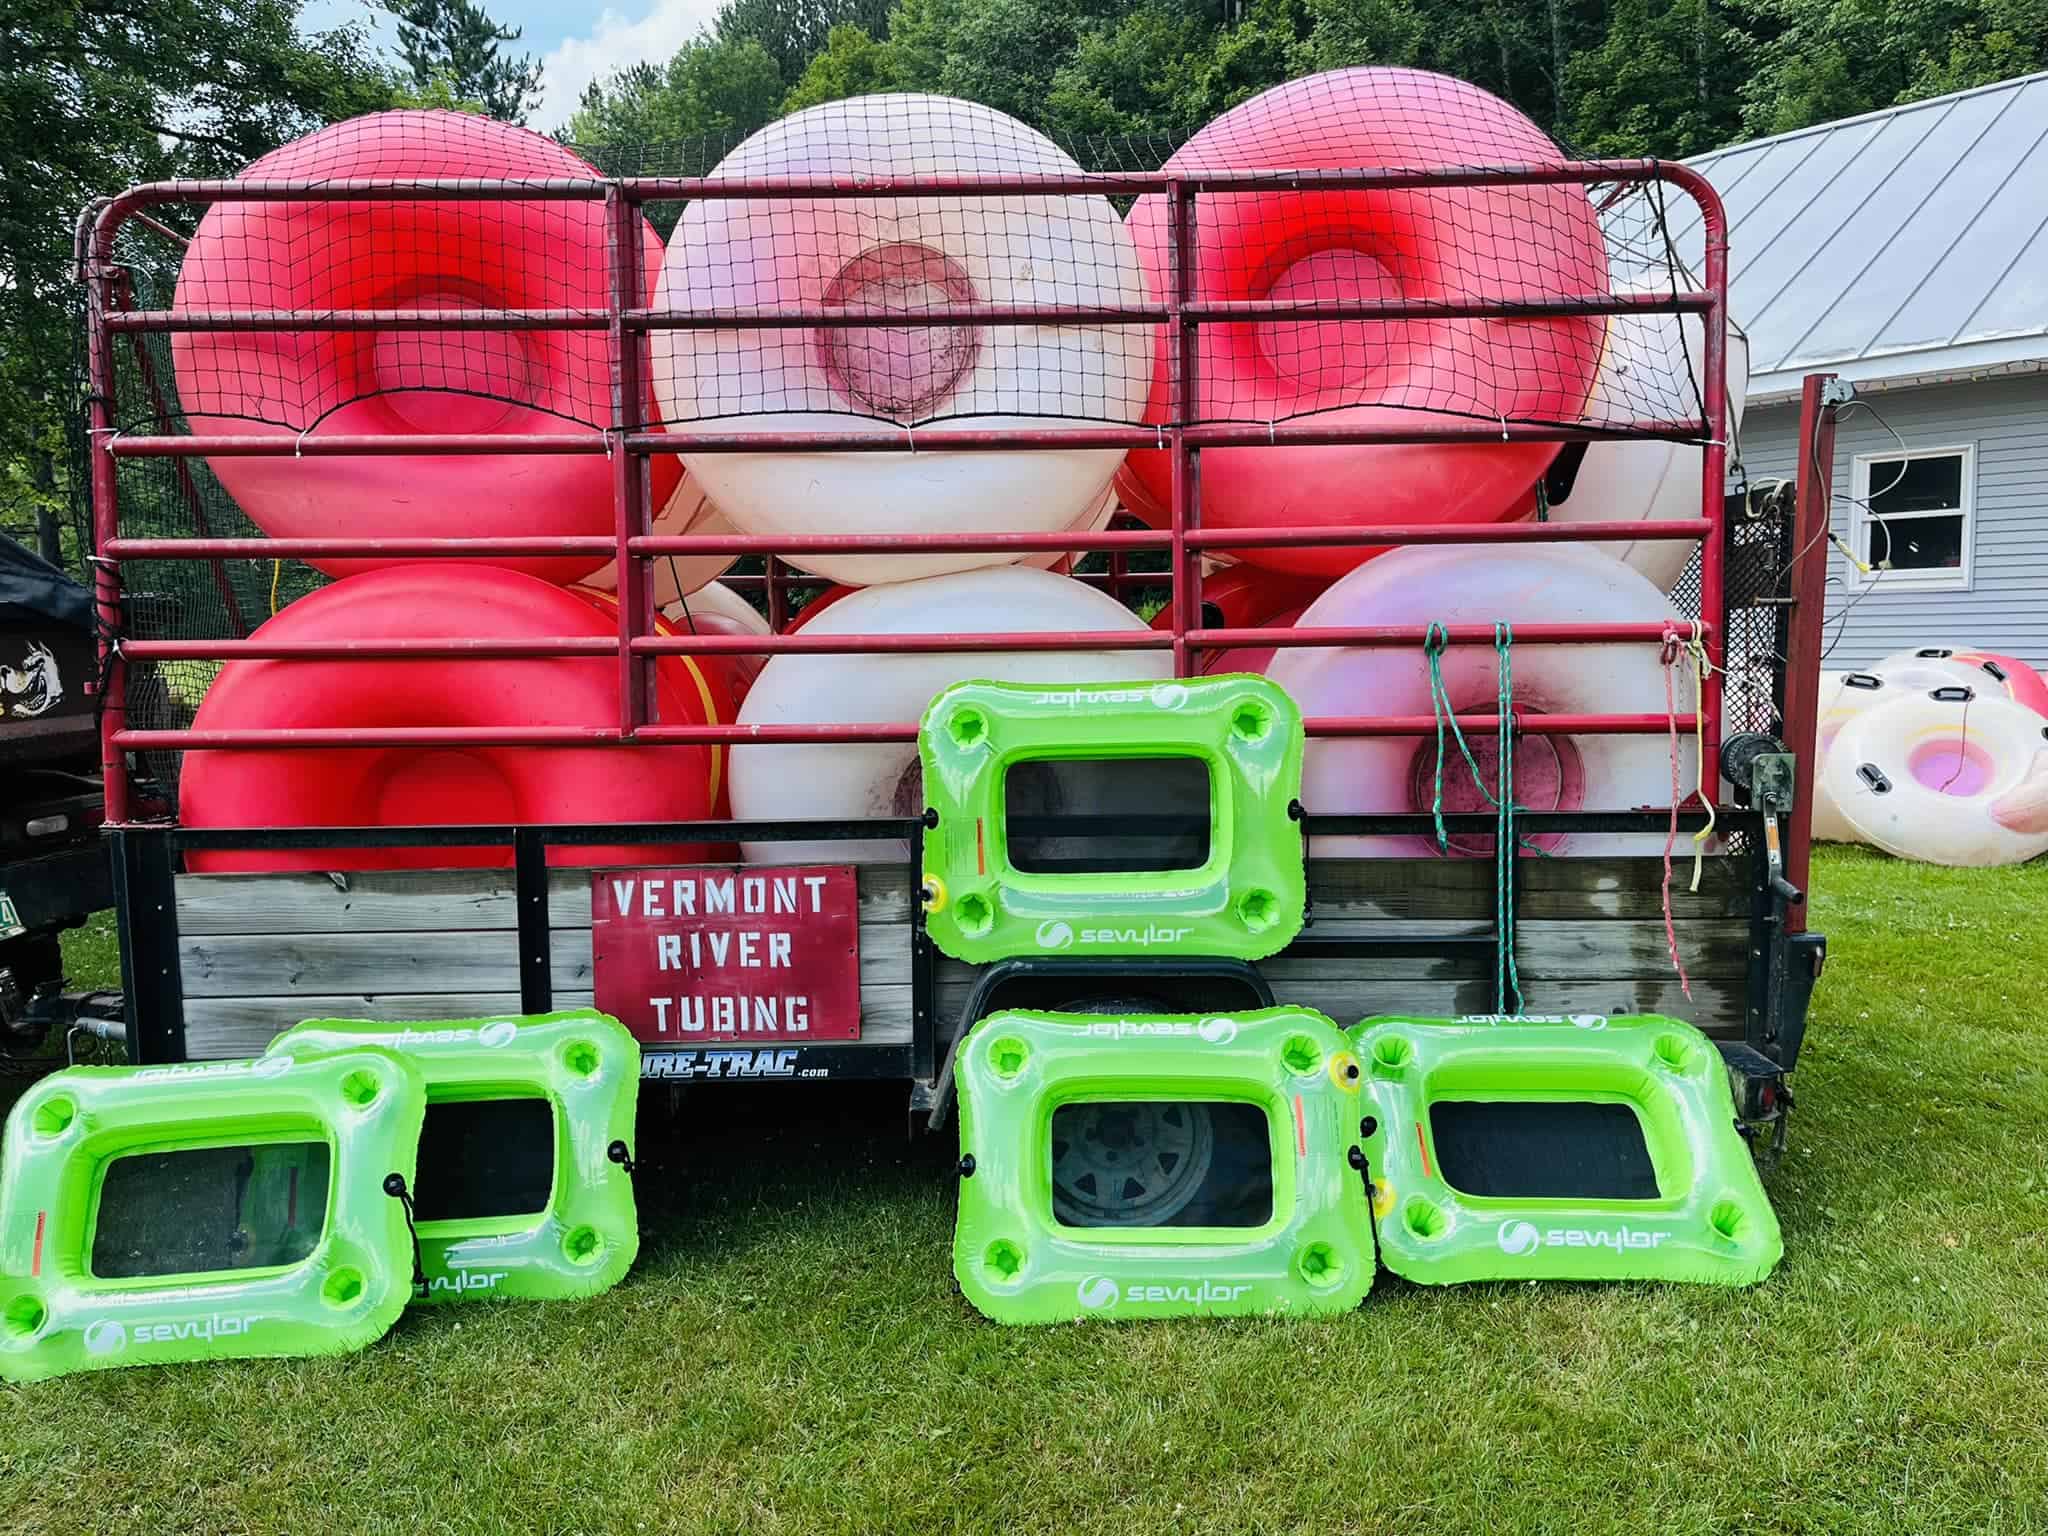 Vermont River Tubing Company - Tubes ready to go